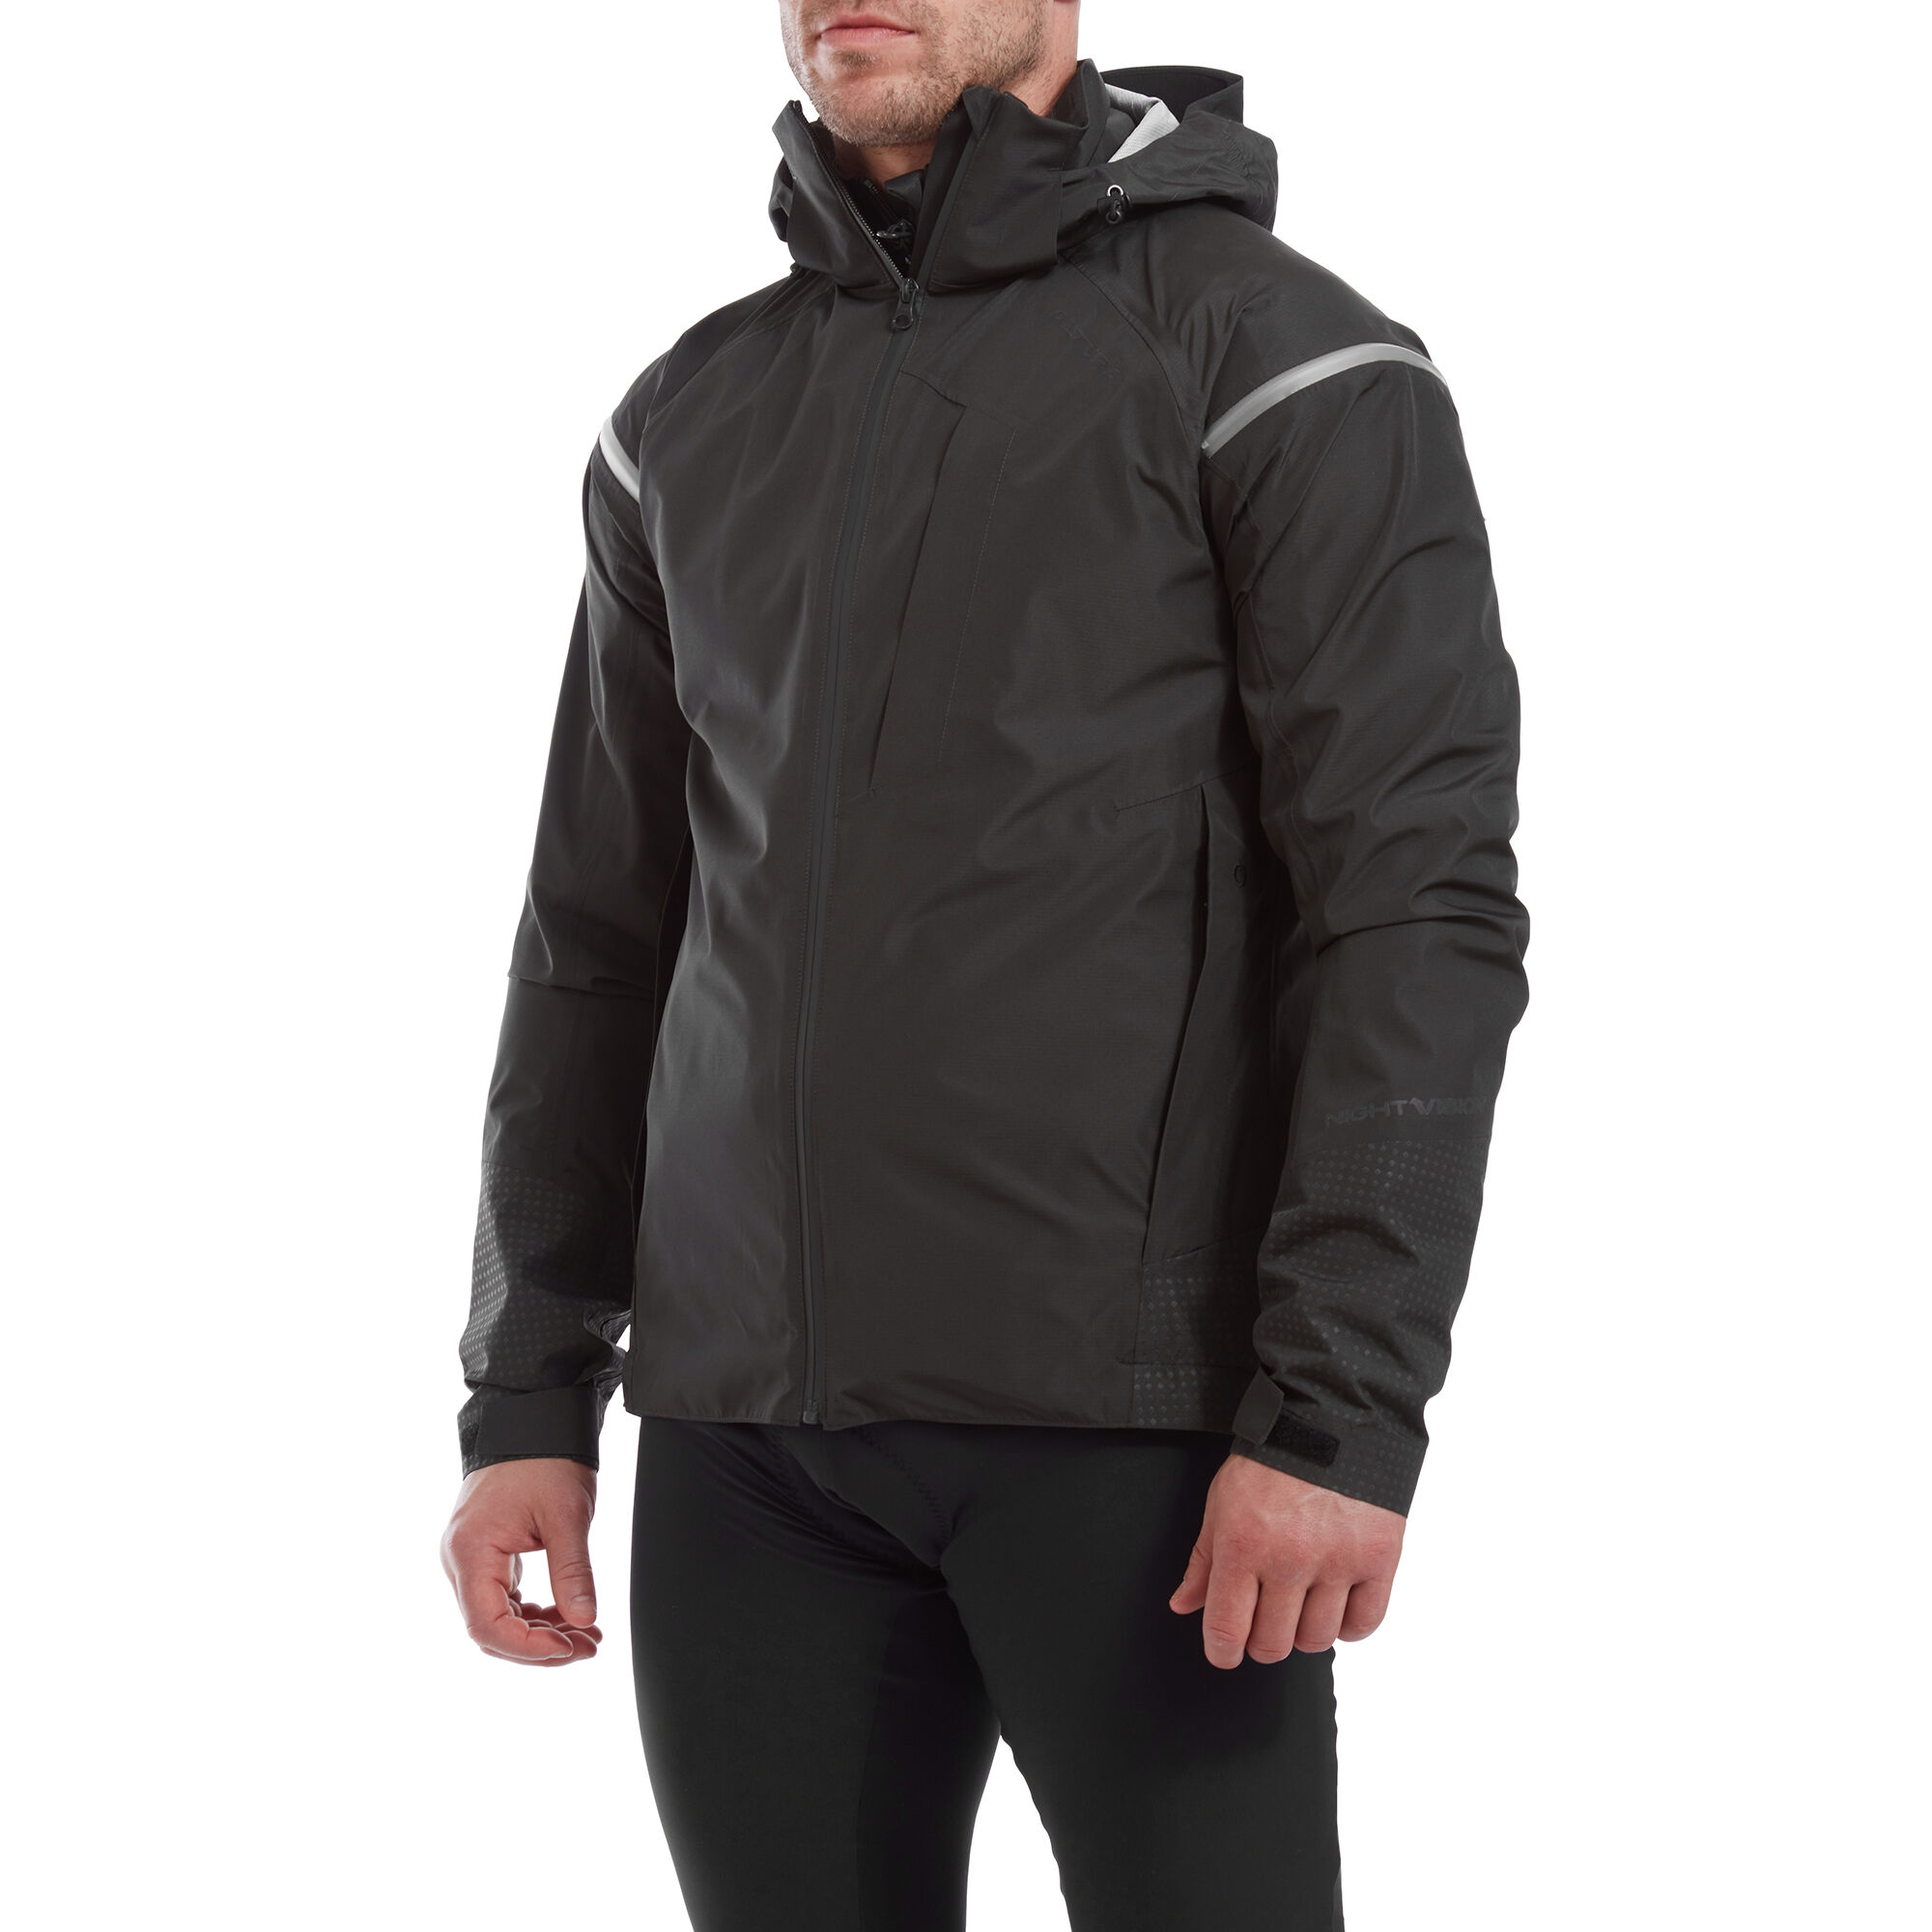 Altura Nightvision Electron - Chaqueta impermeable - Hombre